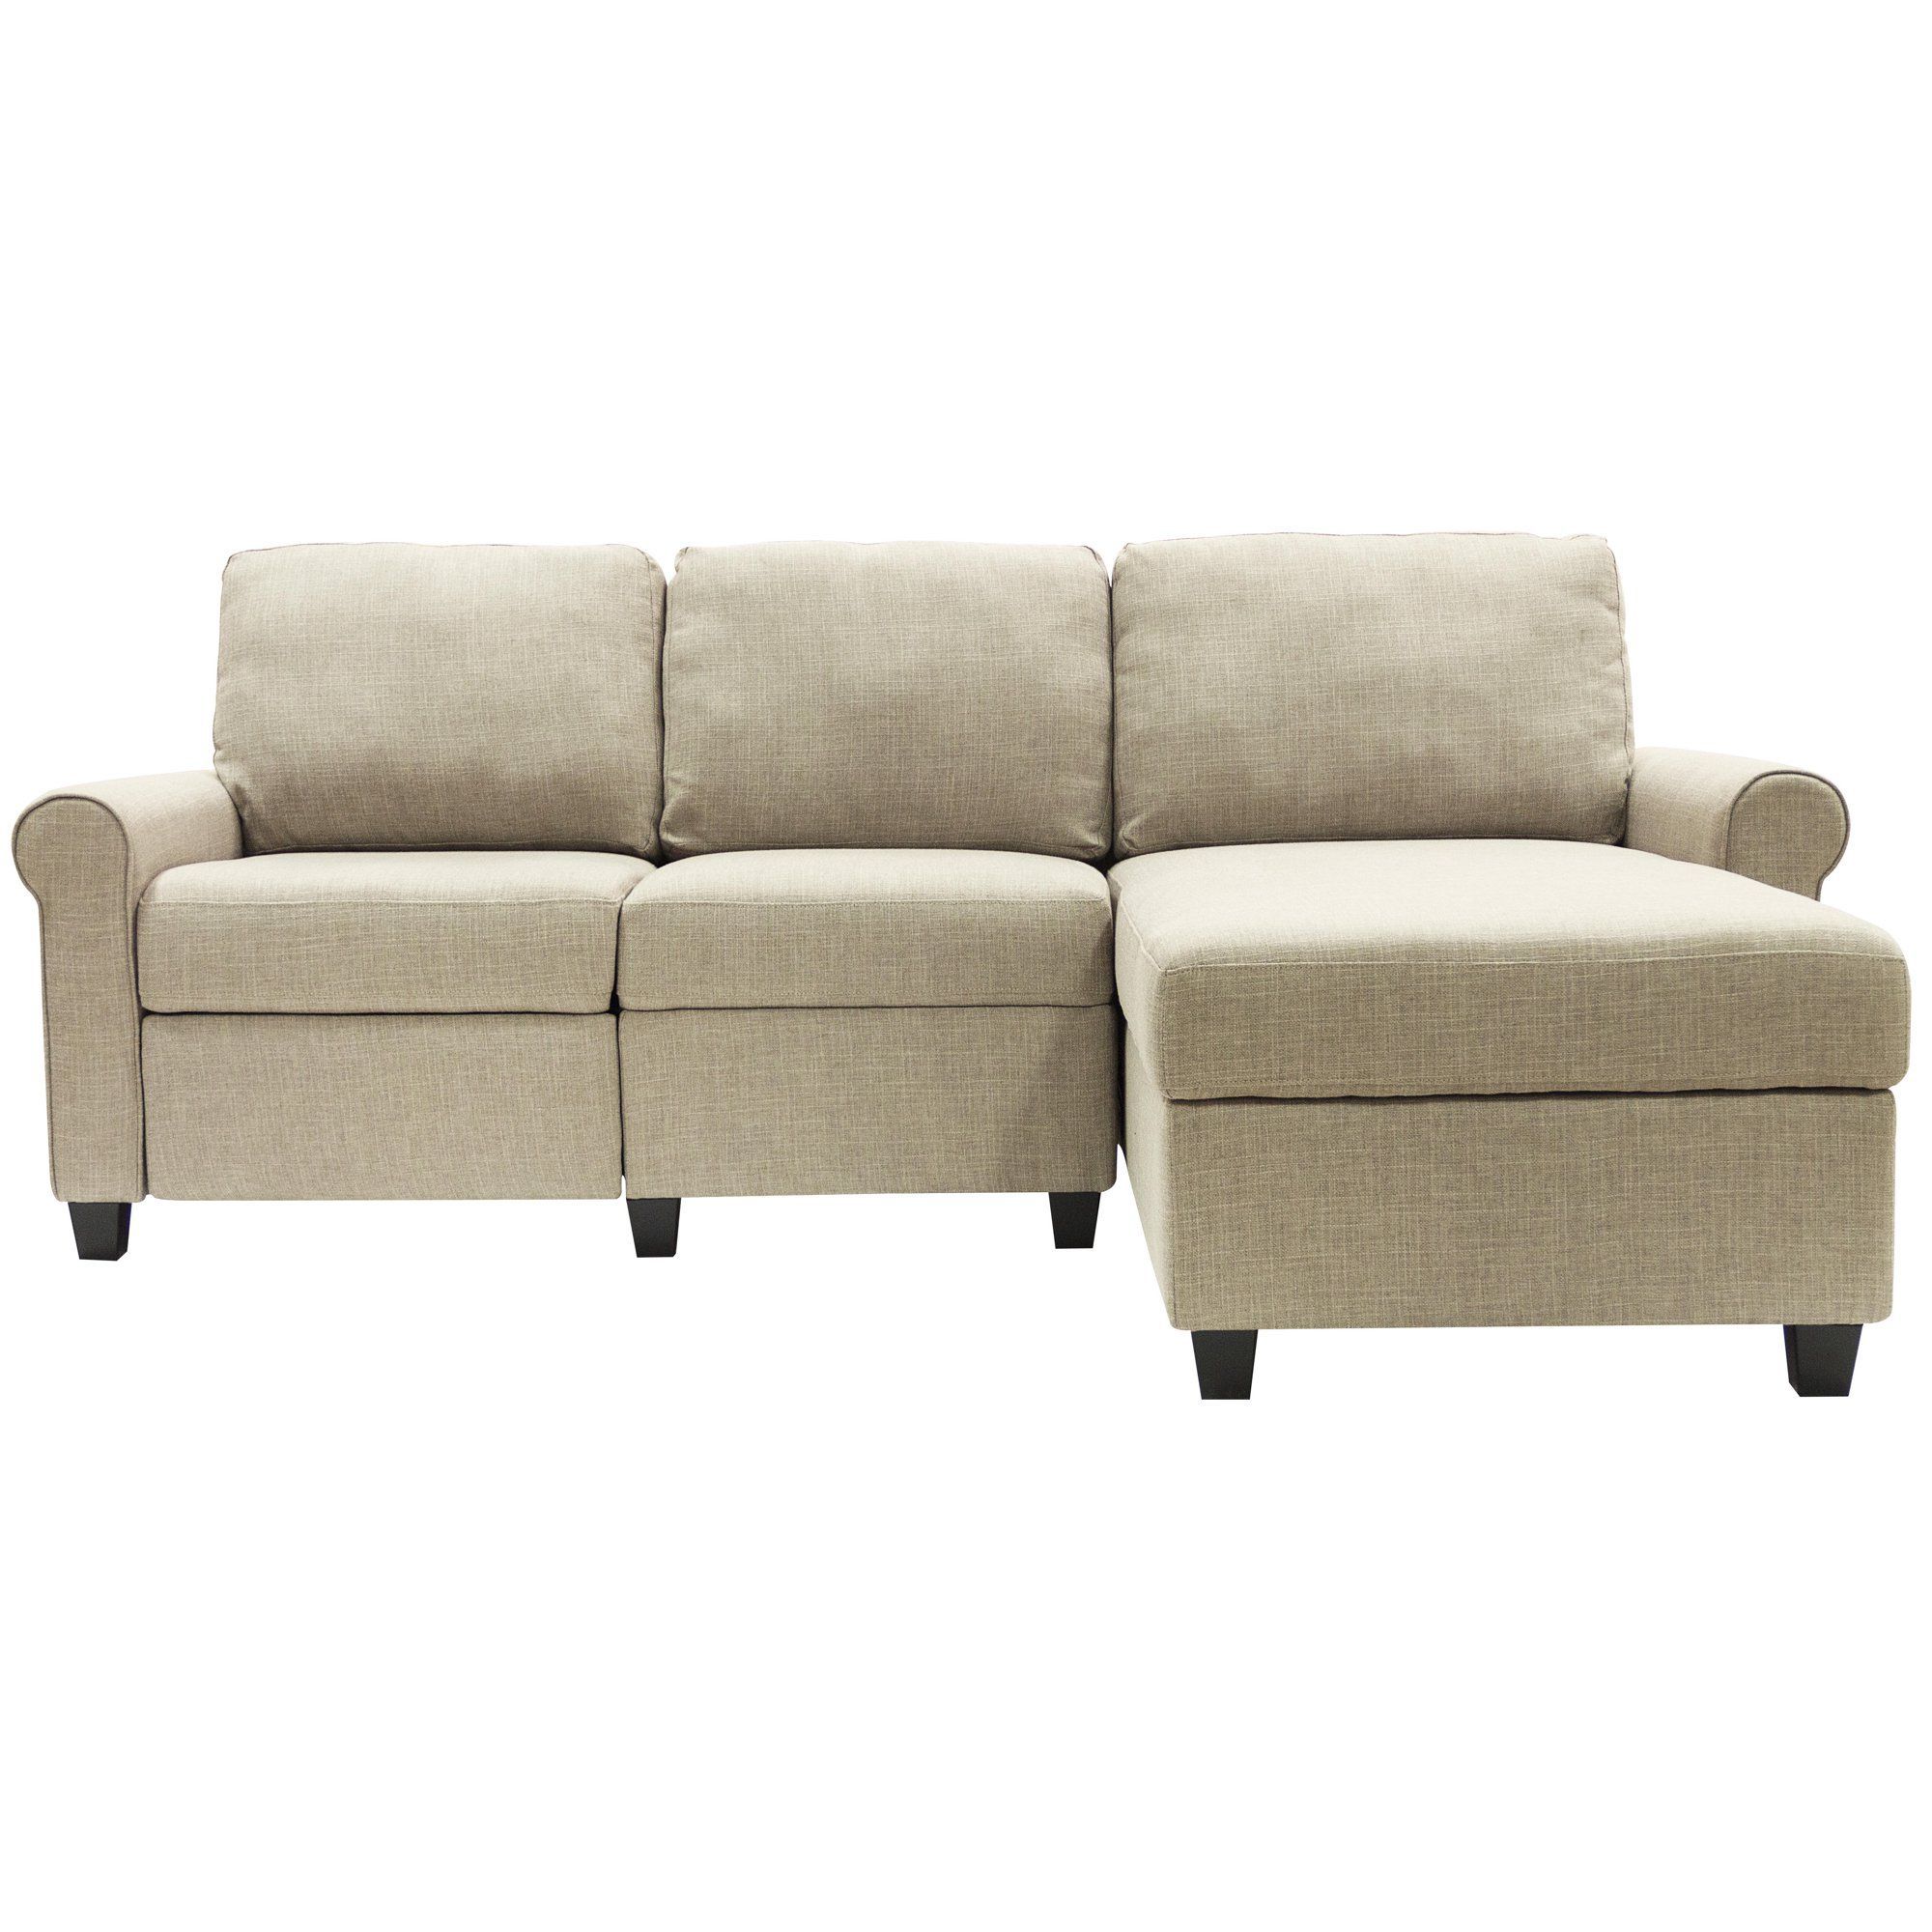 Serta Copenhagen Reclining Sectional With Right Storage With Copenhagen Reclining Sectional Sofas With Left Storage Chaise (View 12 of 15)